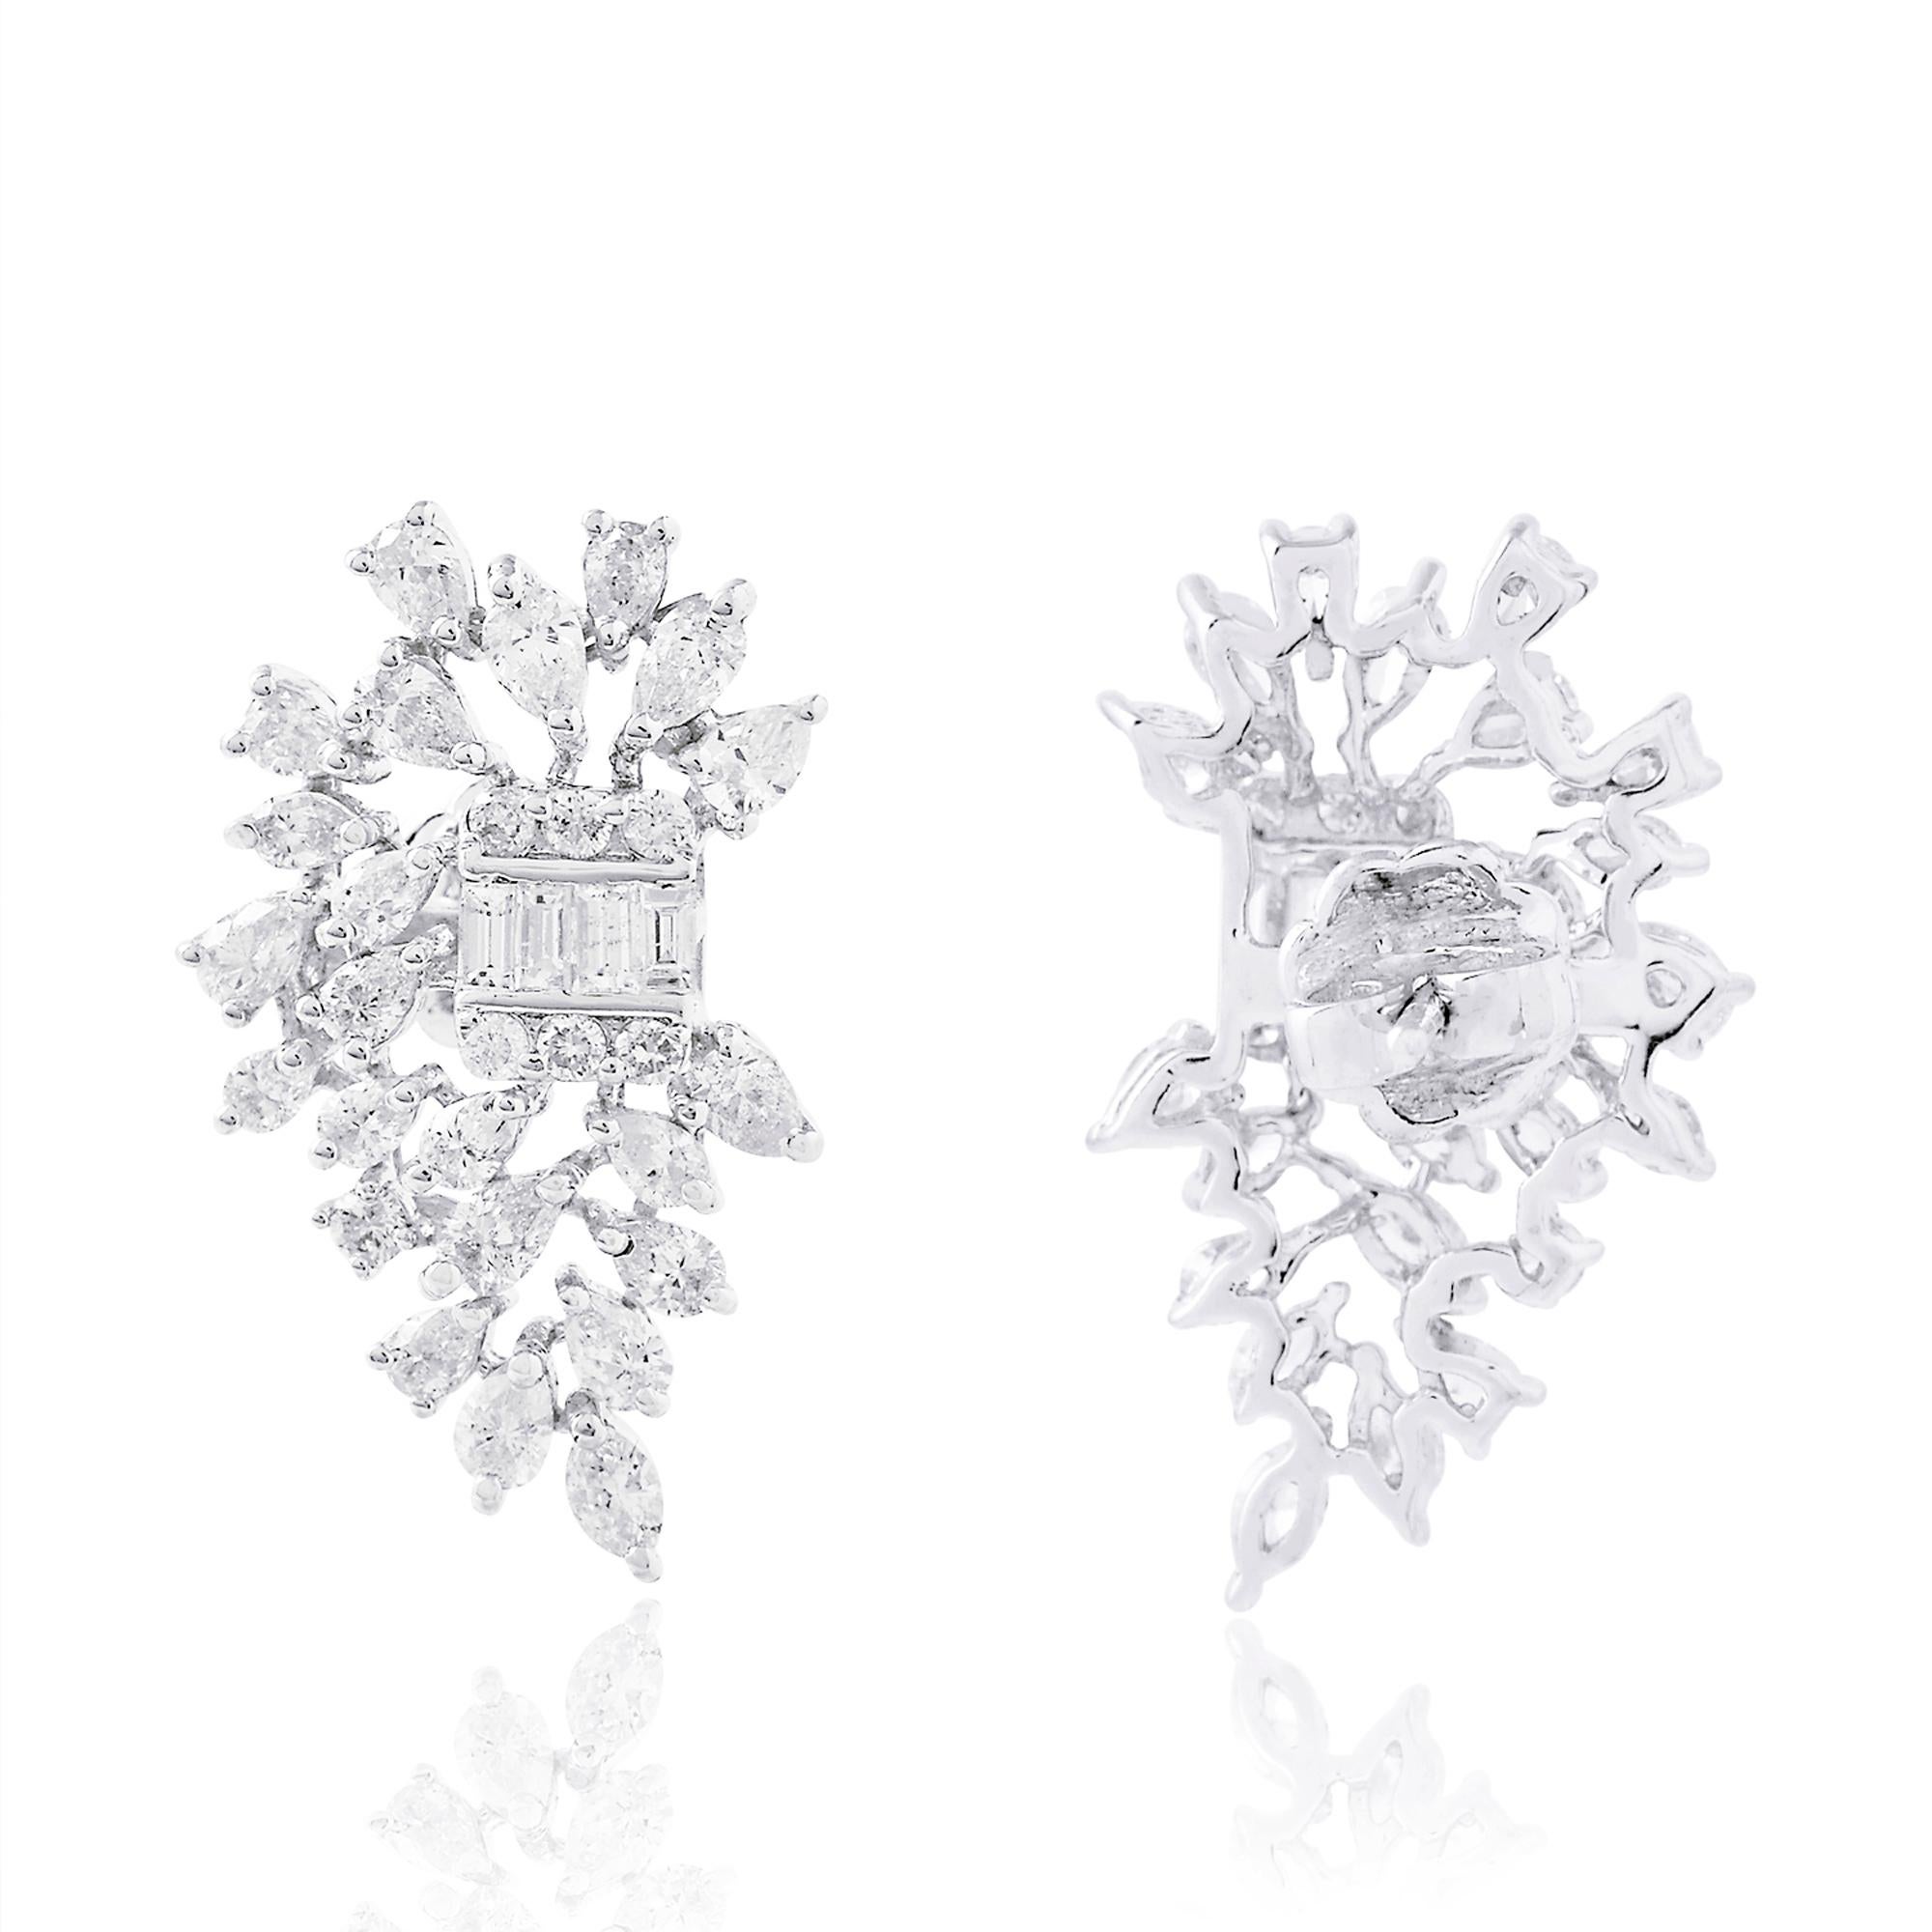 Item Code :- CN-25483
Gross Wt. :- 7.57 gm
18k White Gold Wt. :- 6.92 gm
Diamond Wt. :- 3.25 Ct. ( AVERAGE DIAMOND CLARITY SI1-SI2 & COLOR H-I )
Earrings Size :- 25.35 x 14.91 mm approx.
✦ Sizing
.....................
We can adjust most items to fit